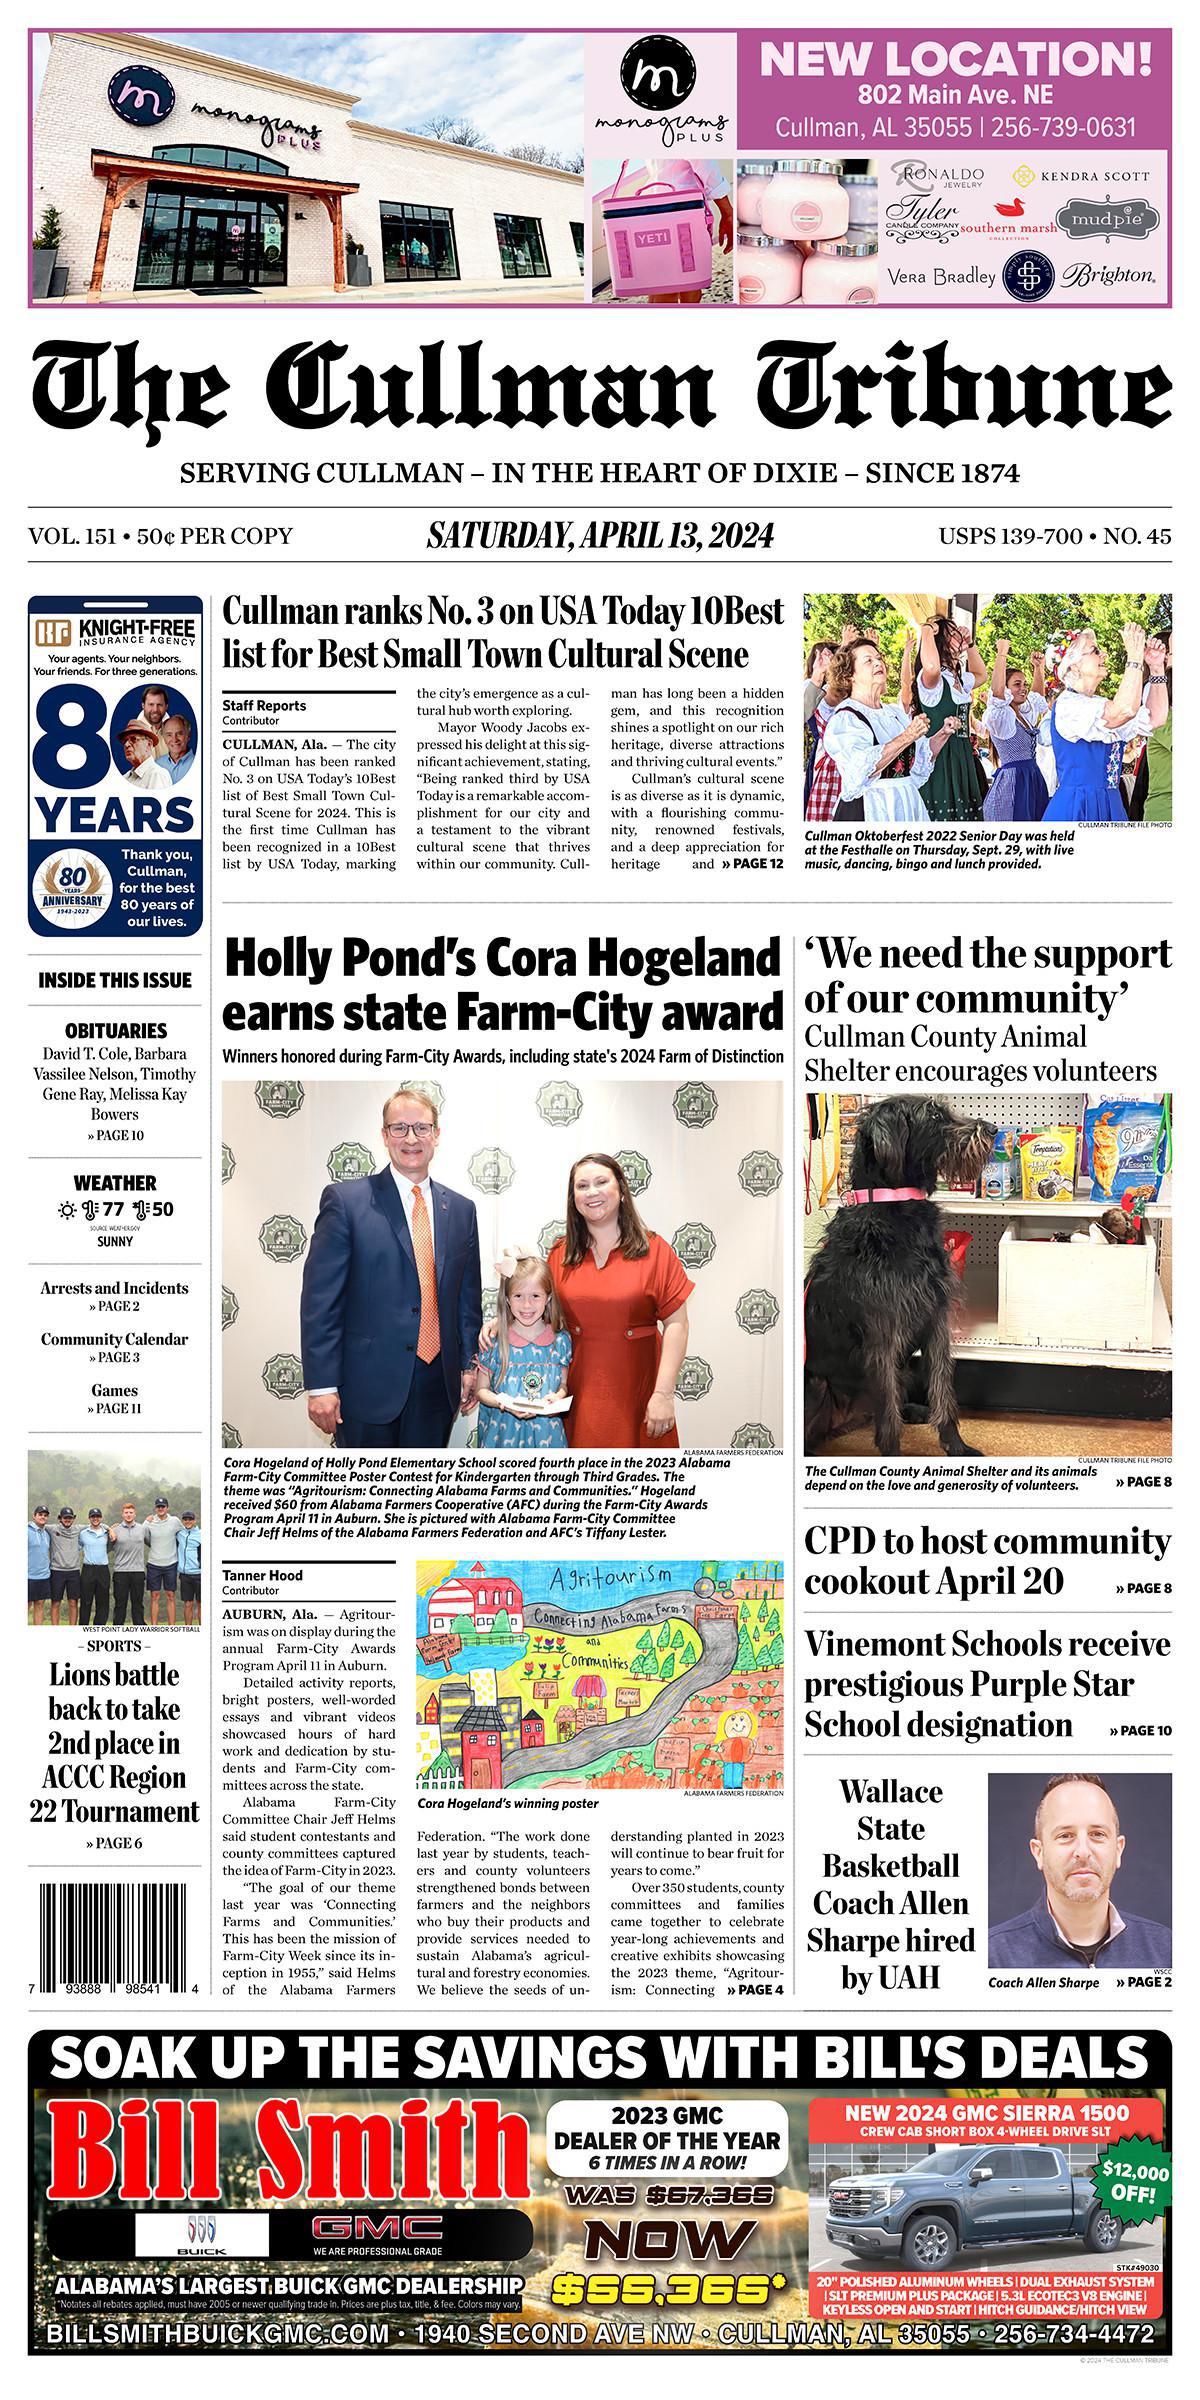 Good Morning Cullman! The 04-13-2024 edition of the Cullman Tribune is now ready to view.